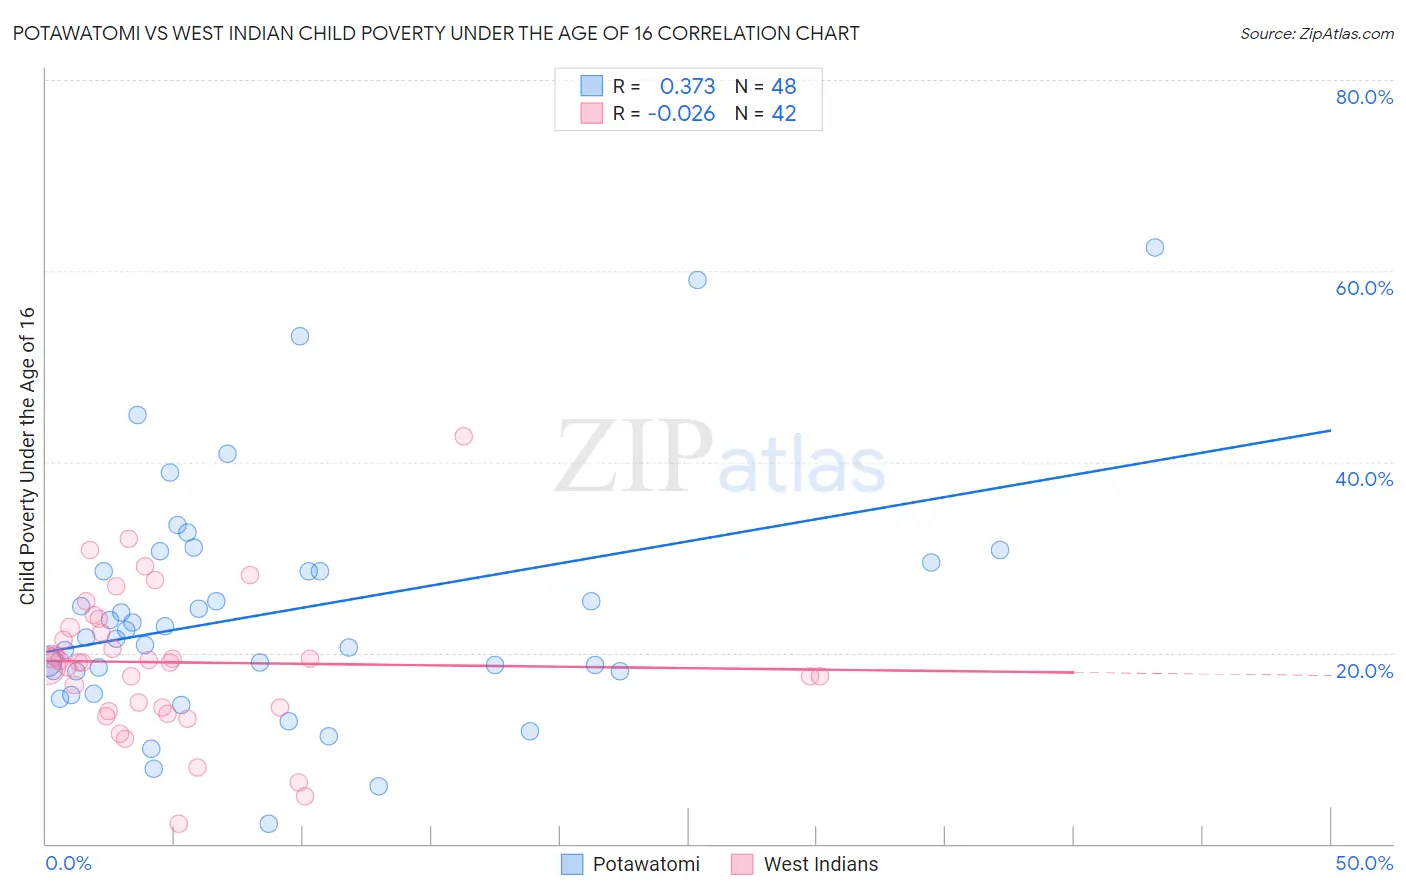 Potawatomi vs West Indian Child Poverty Under the Age of 16